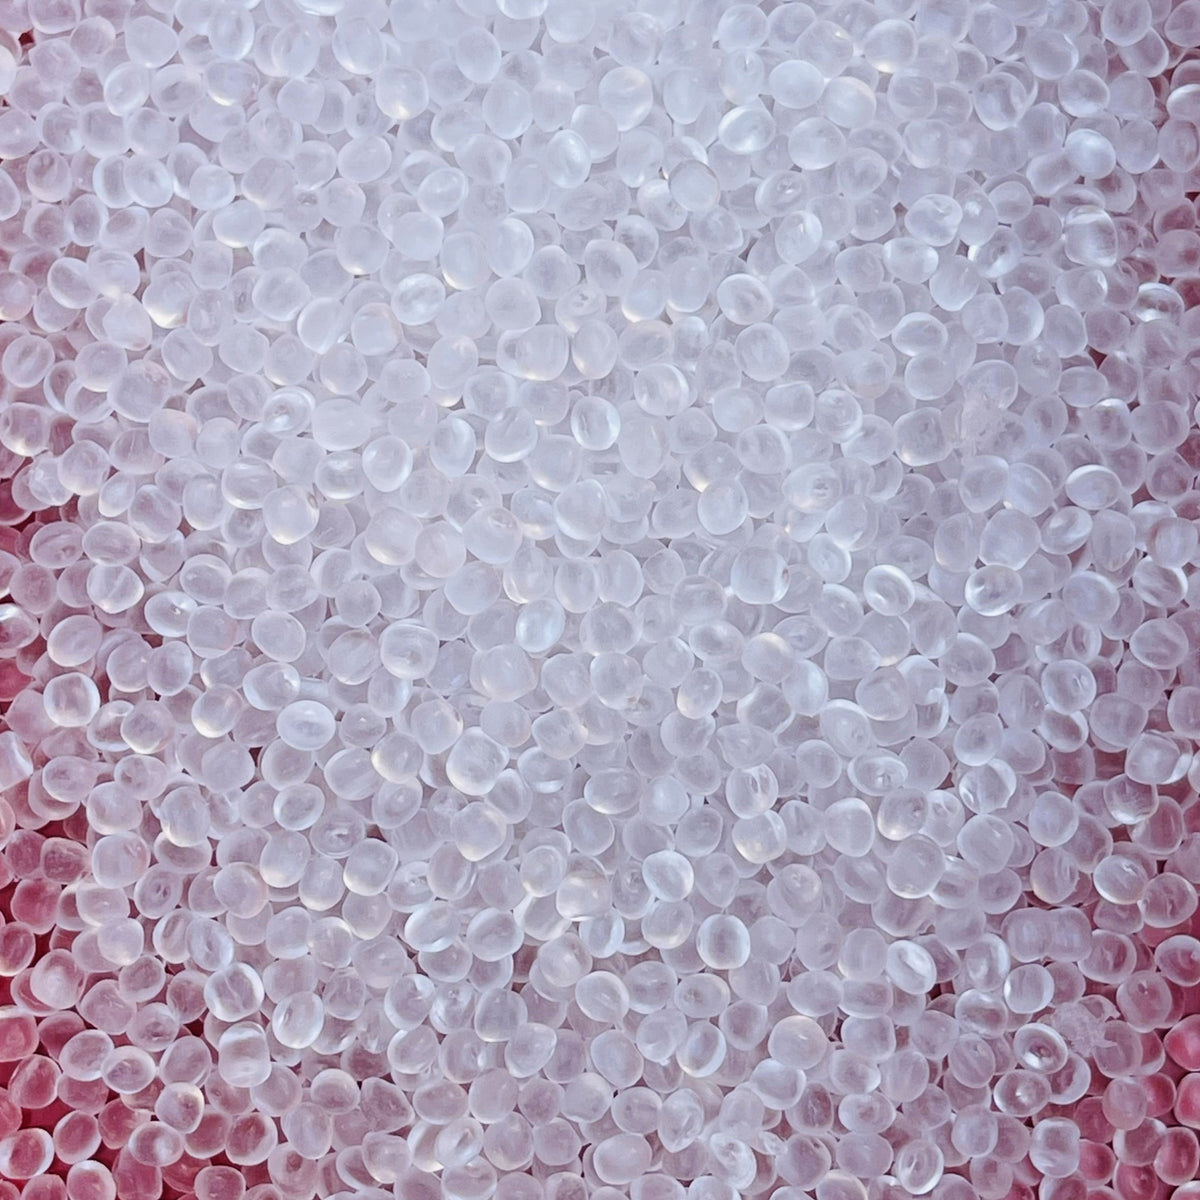 Free Shipping 3 Lb Prime Unscented Aroma Beads. Used for Air